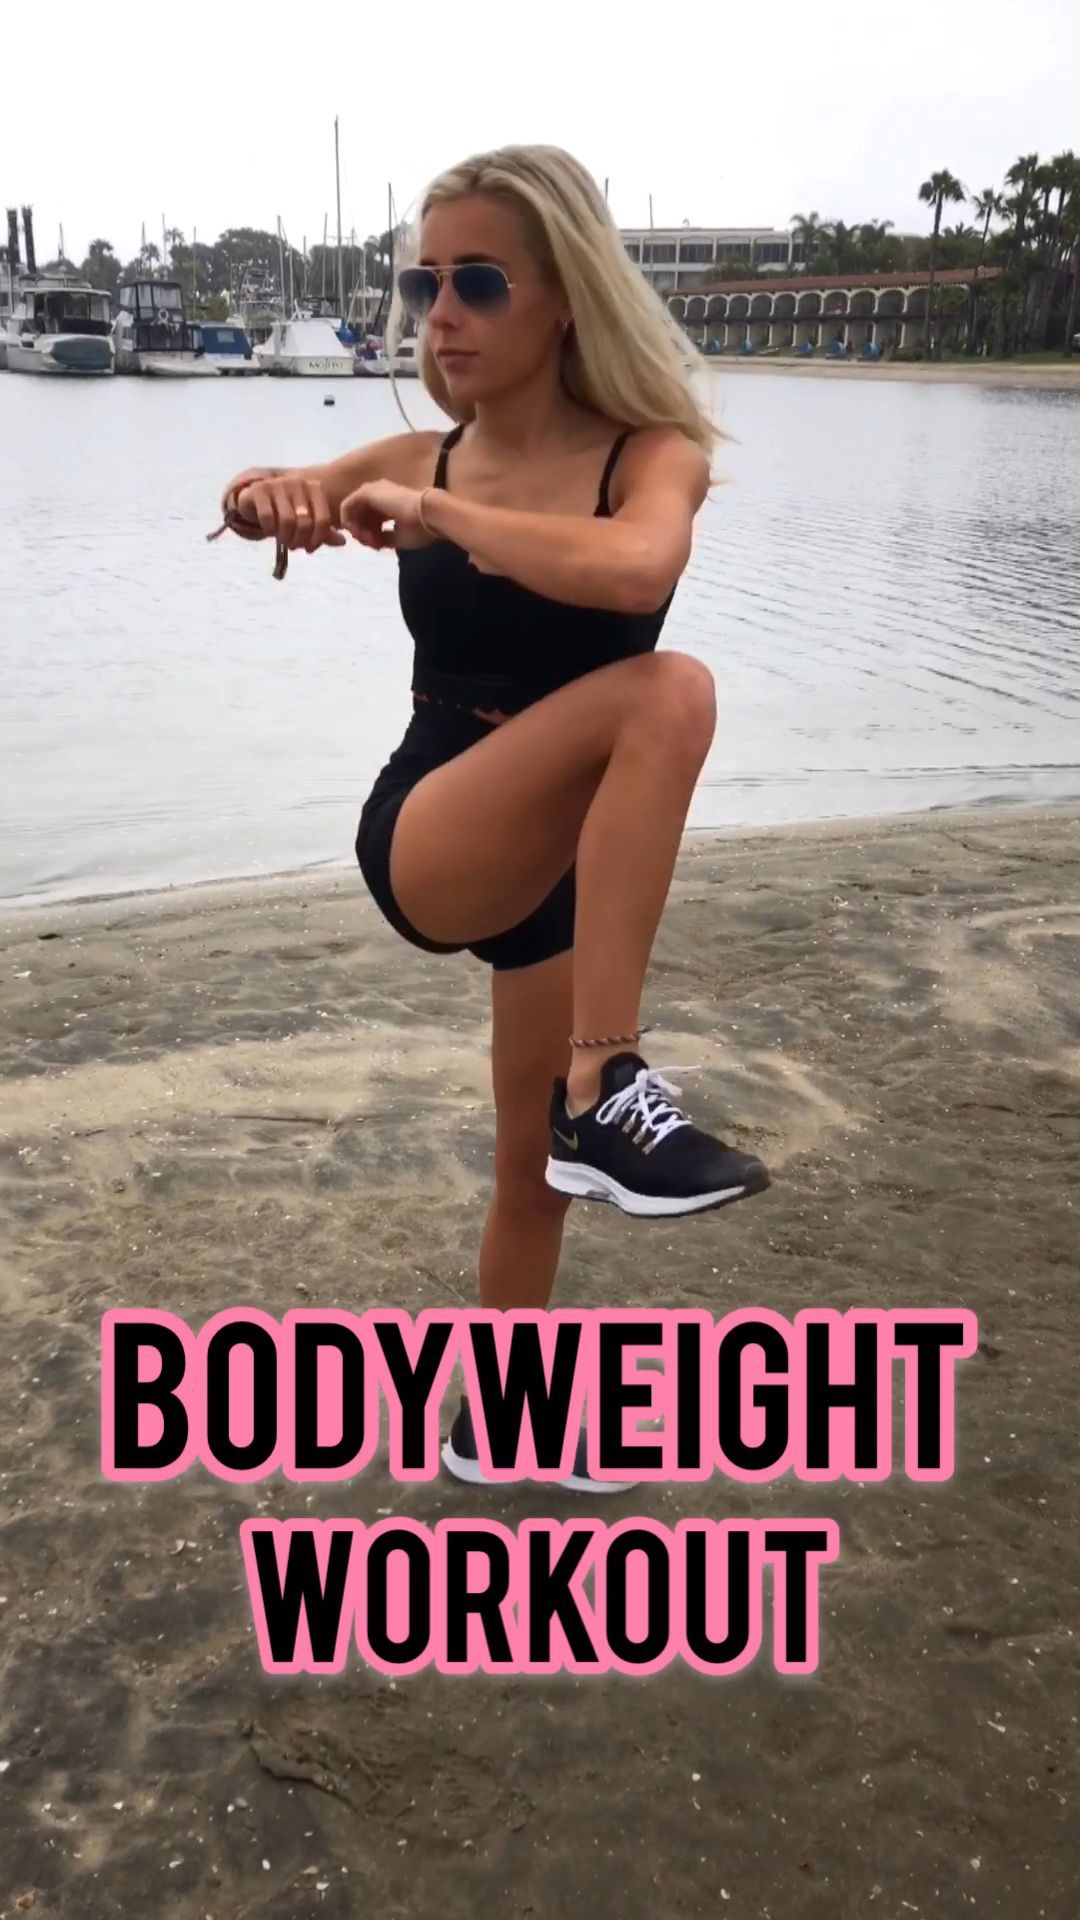 Bodyweight Beach Workout- Follow @ambrymehr IG for free workouts! -   19 fitness Exercises beauty ideas